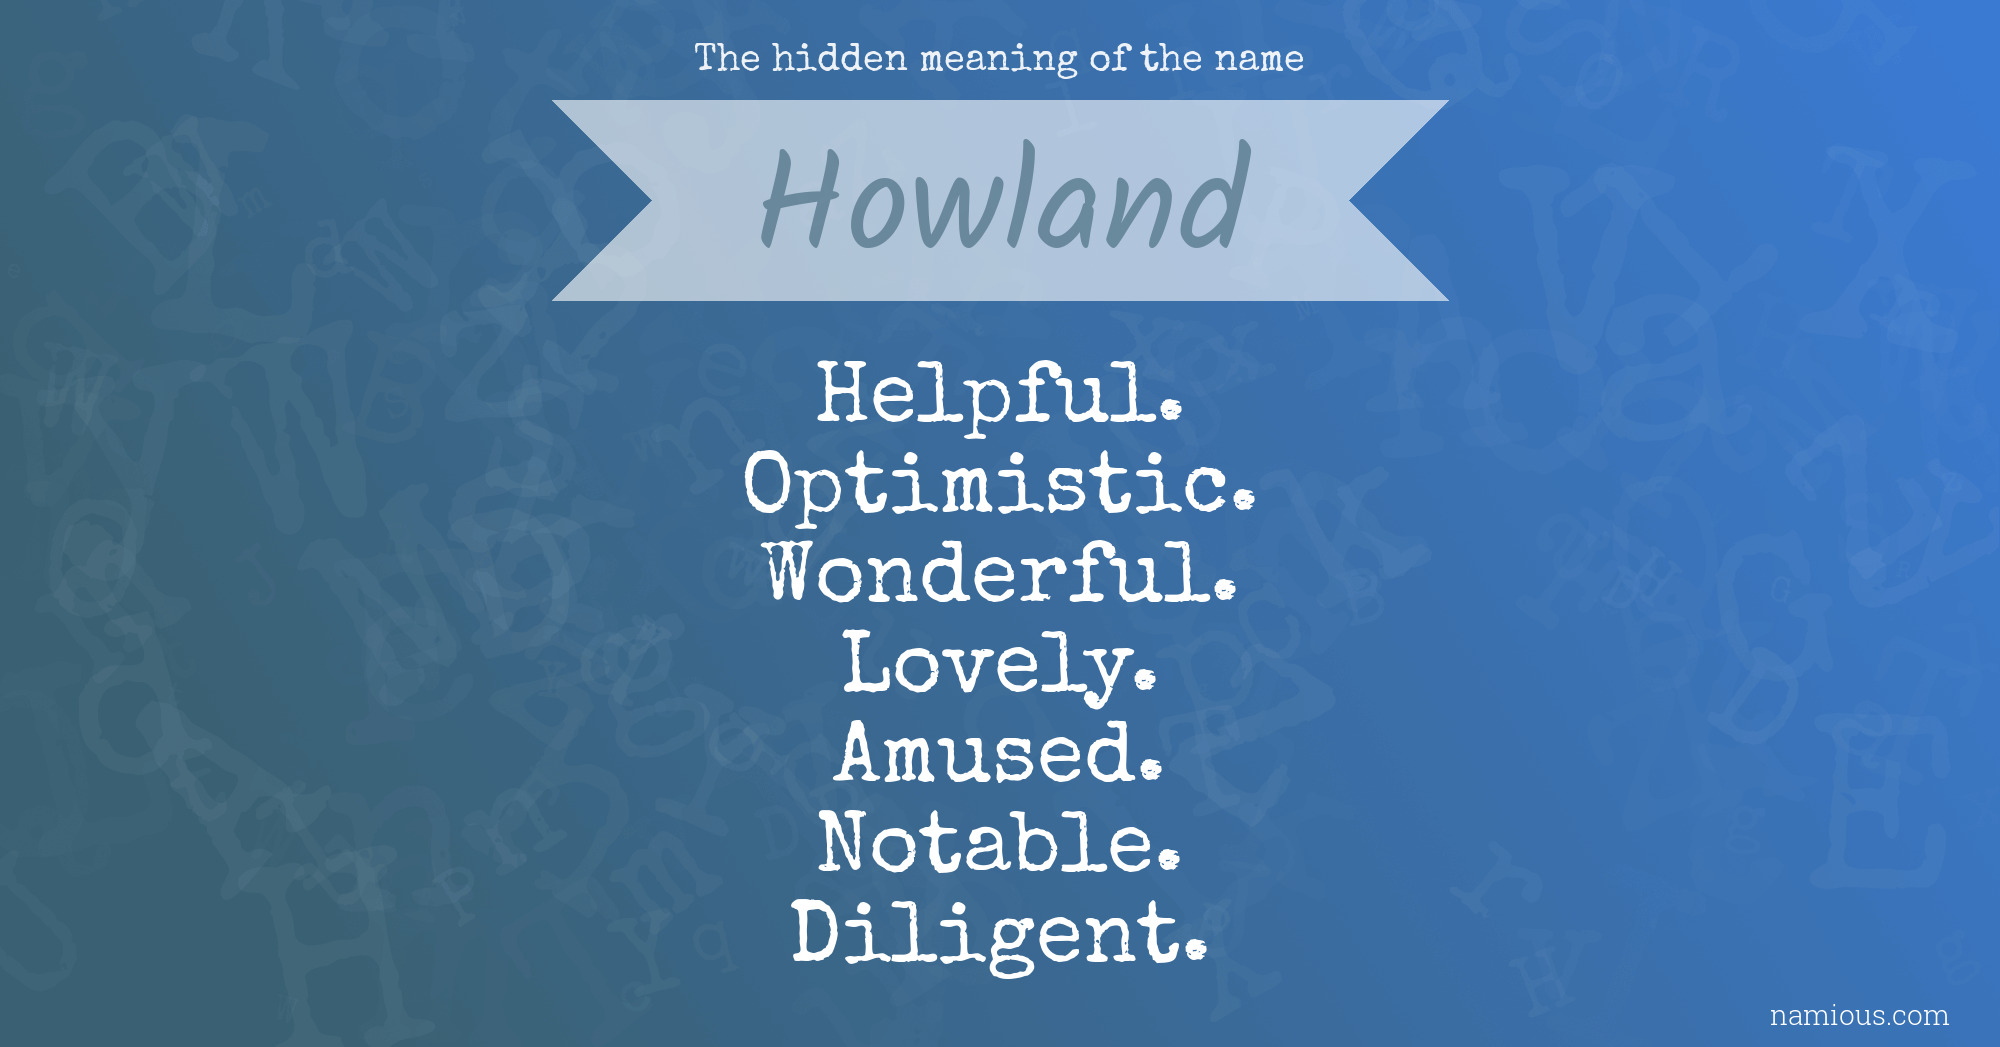 The hidden meaning of the name Howland